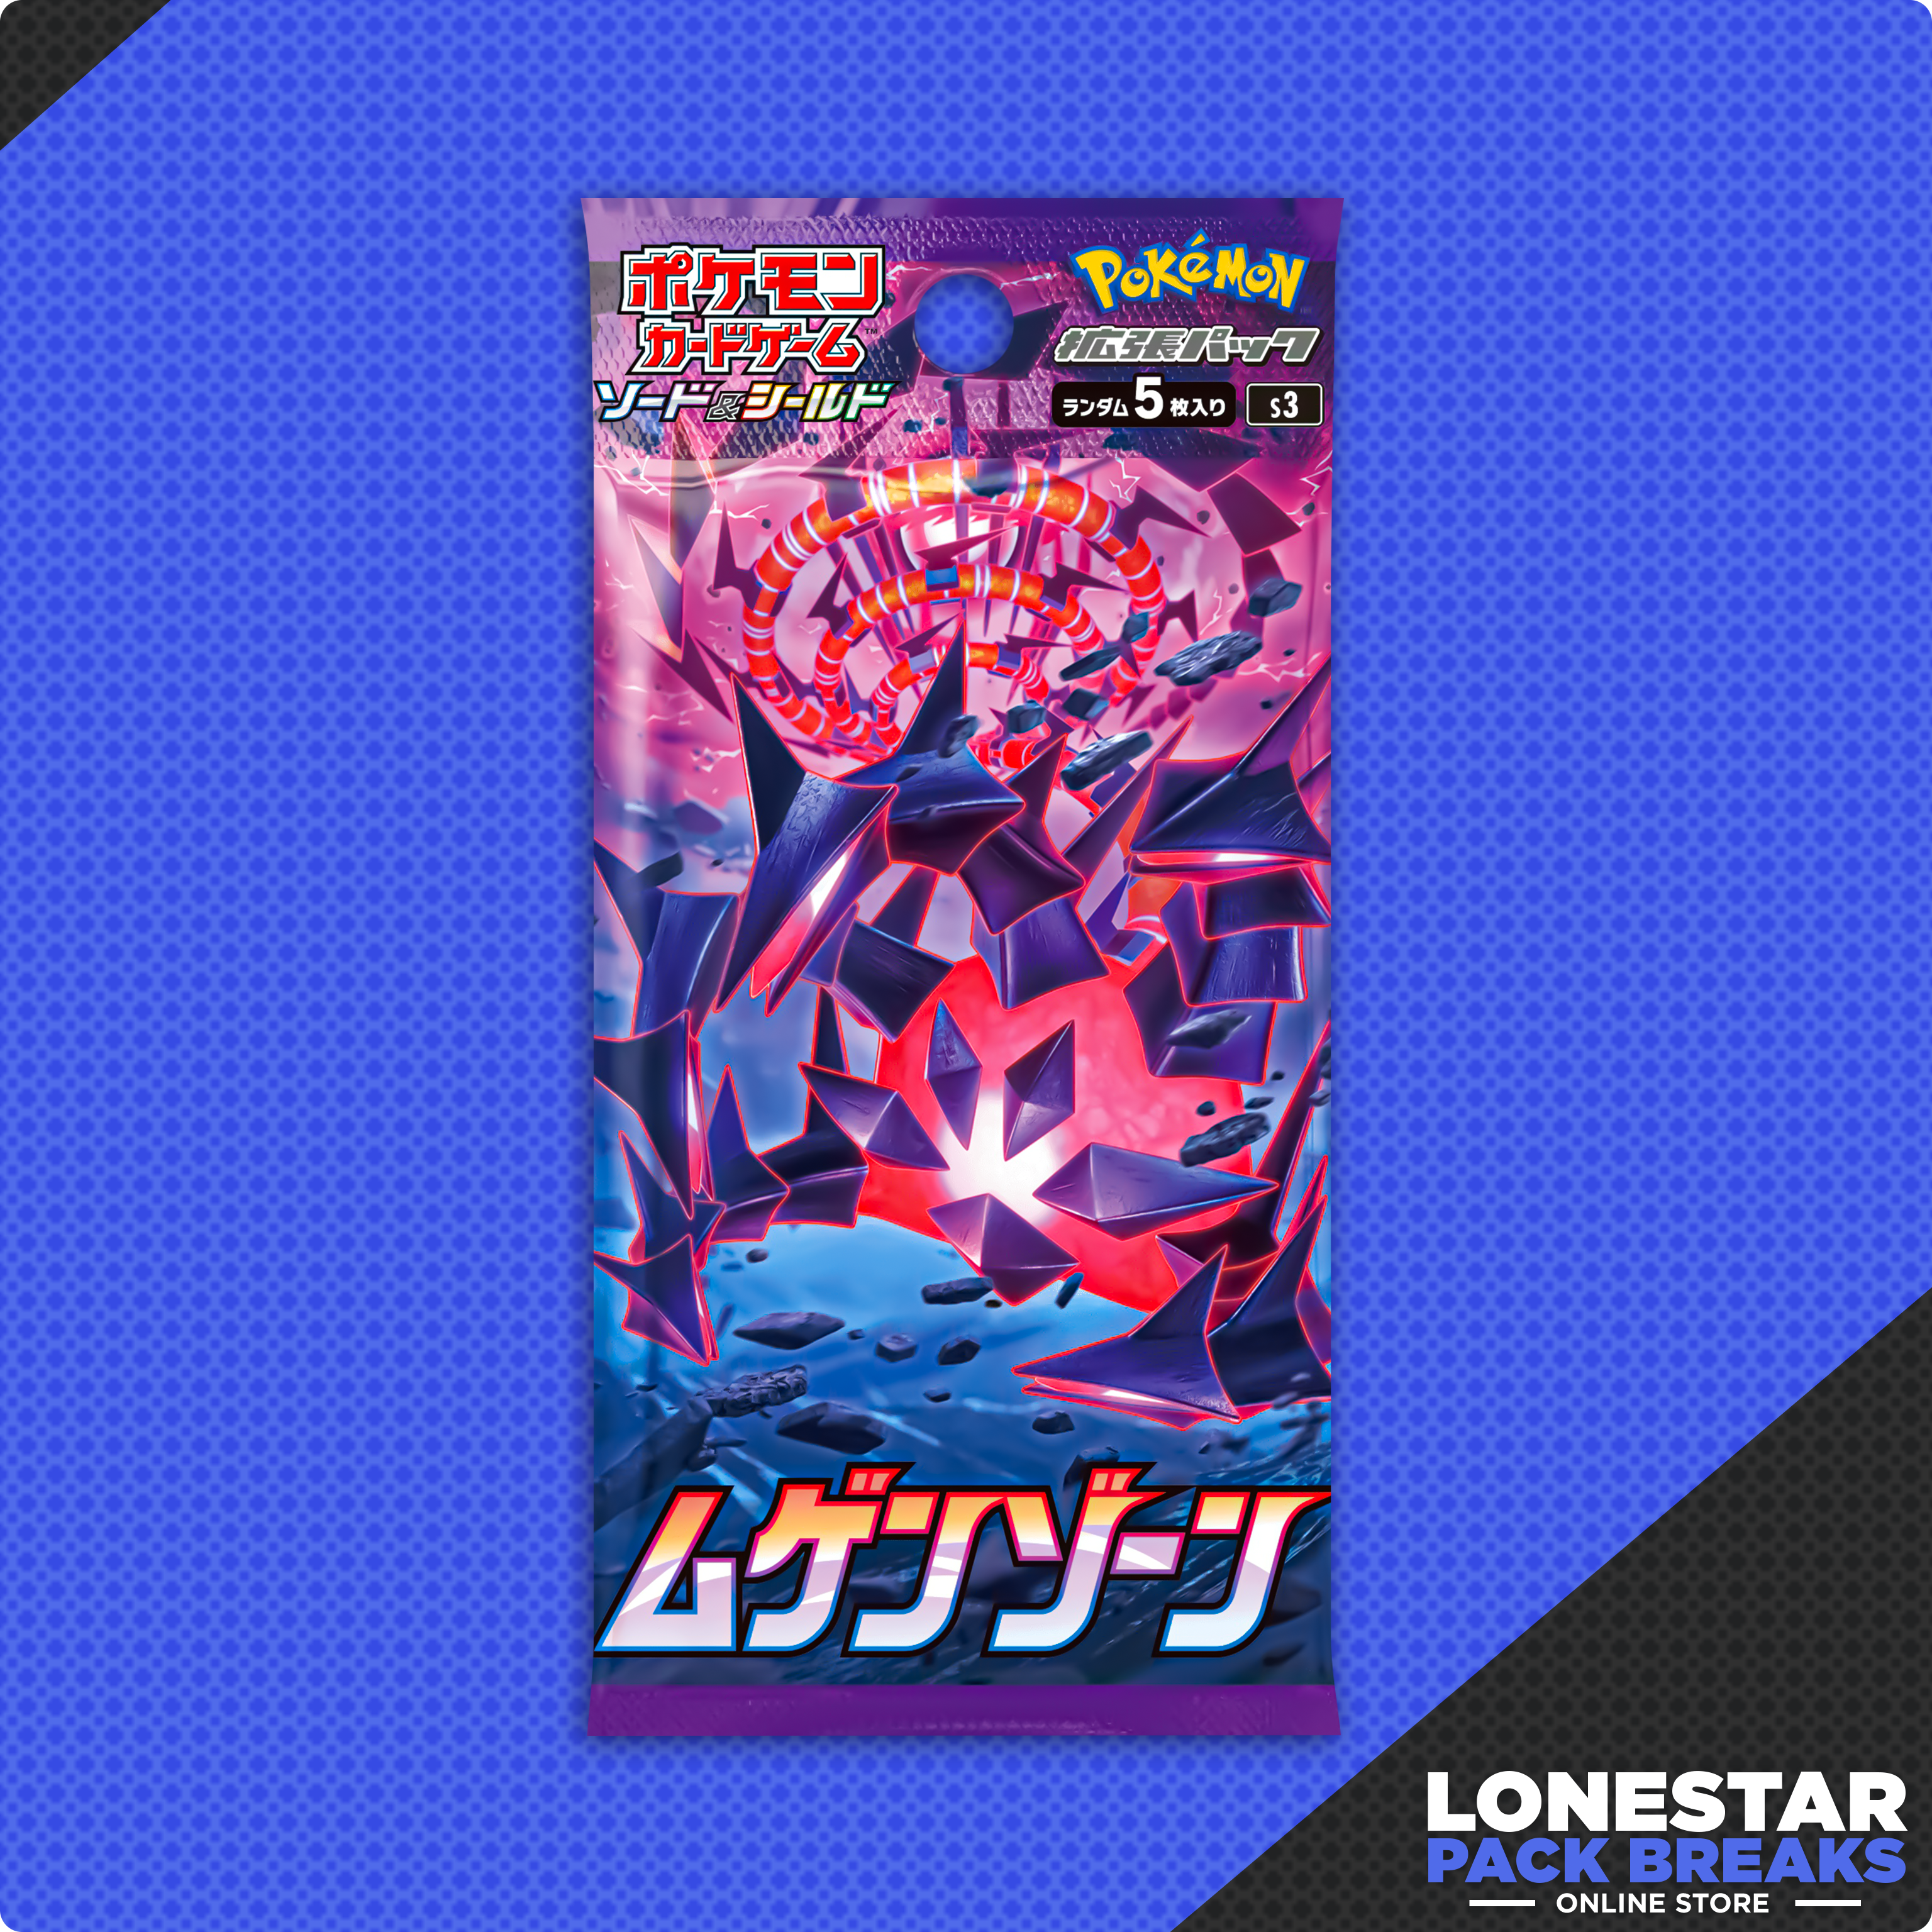 Infinity Zone S3 Booster Pack-Japanese